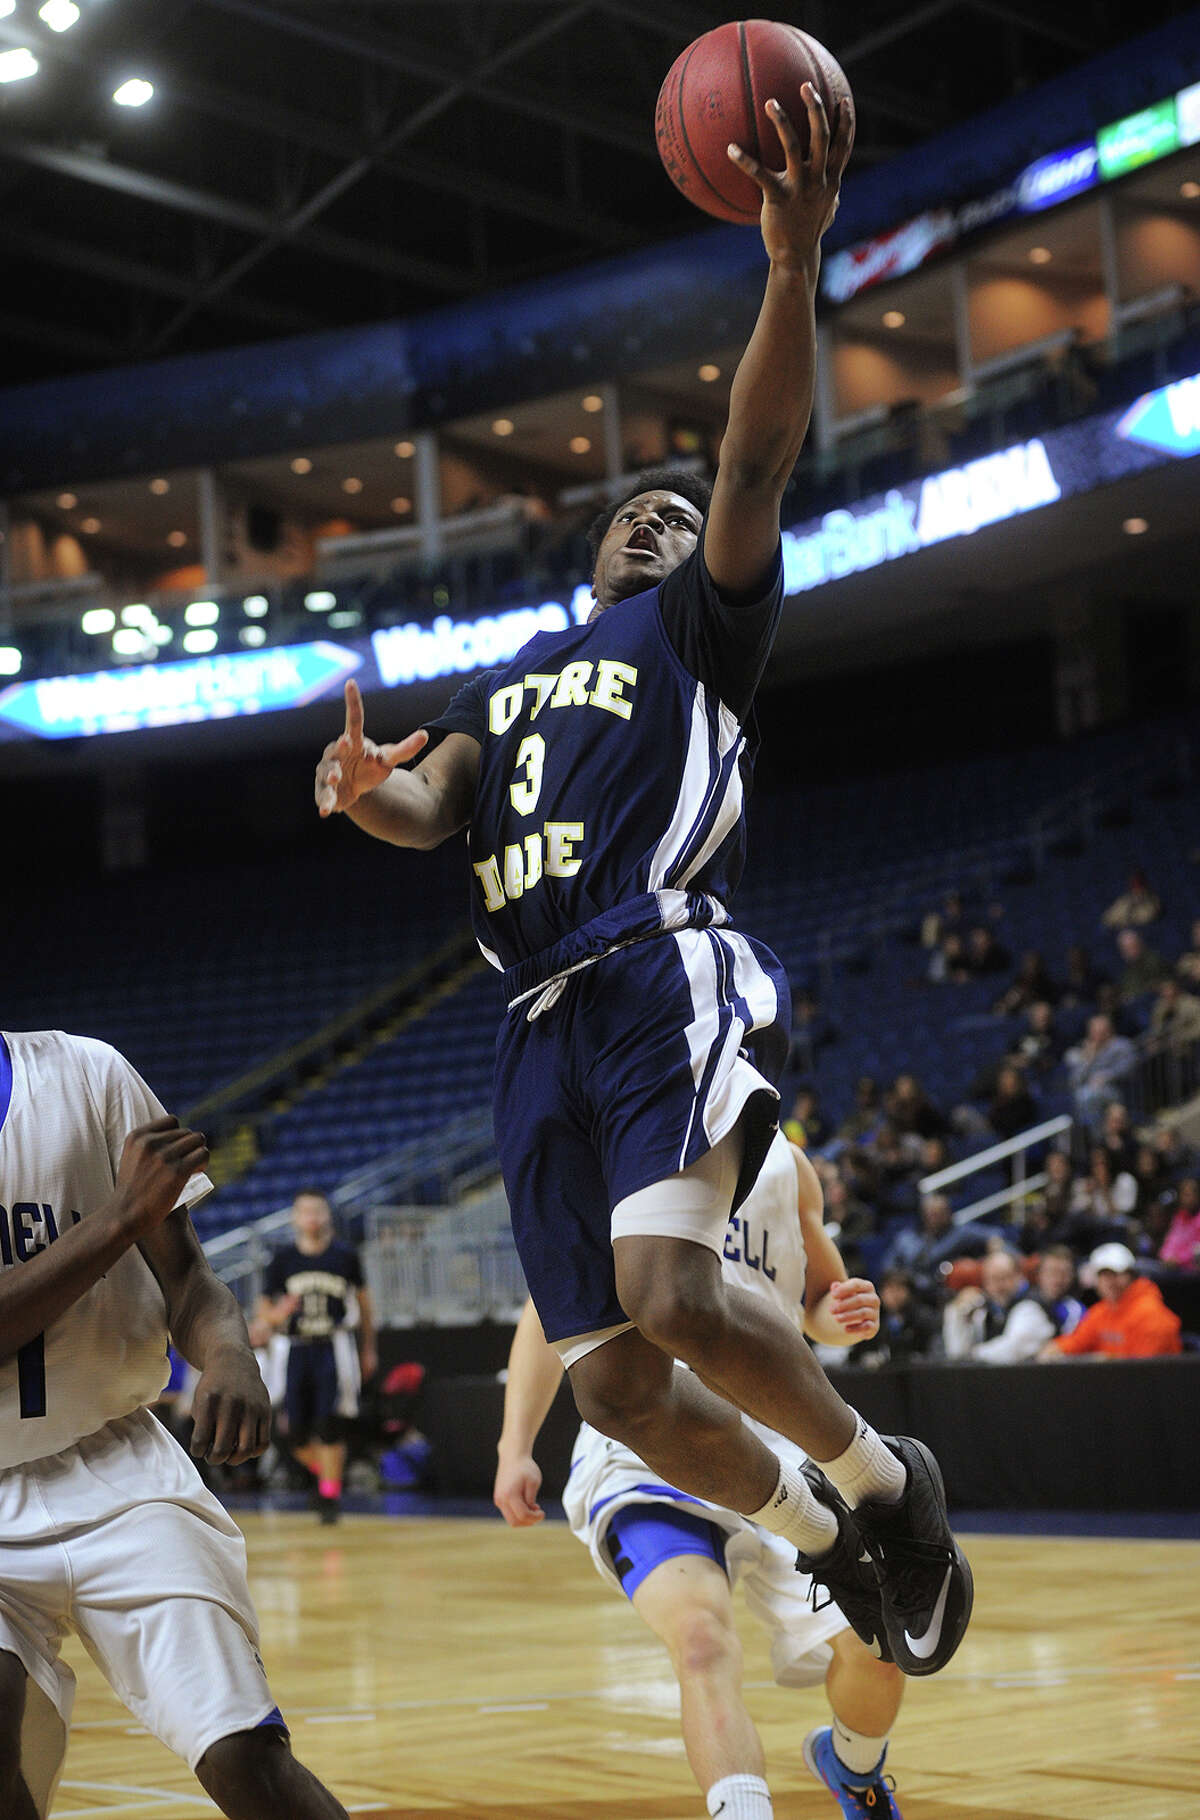 Notre Dame of Fairfield's Clinton Davidson drives to the basket during the fourth quarter of their victory over Bunnell at the Webster Bank Arena in Bridgeport, Conn. on Monday, February 16, 2015.